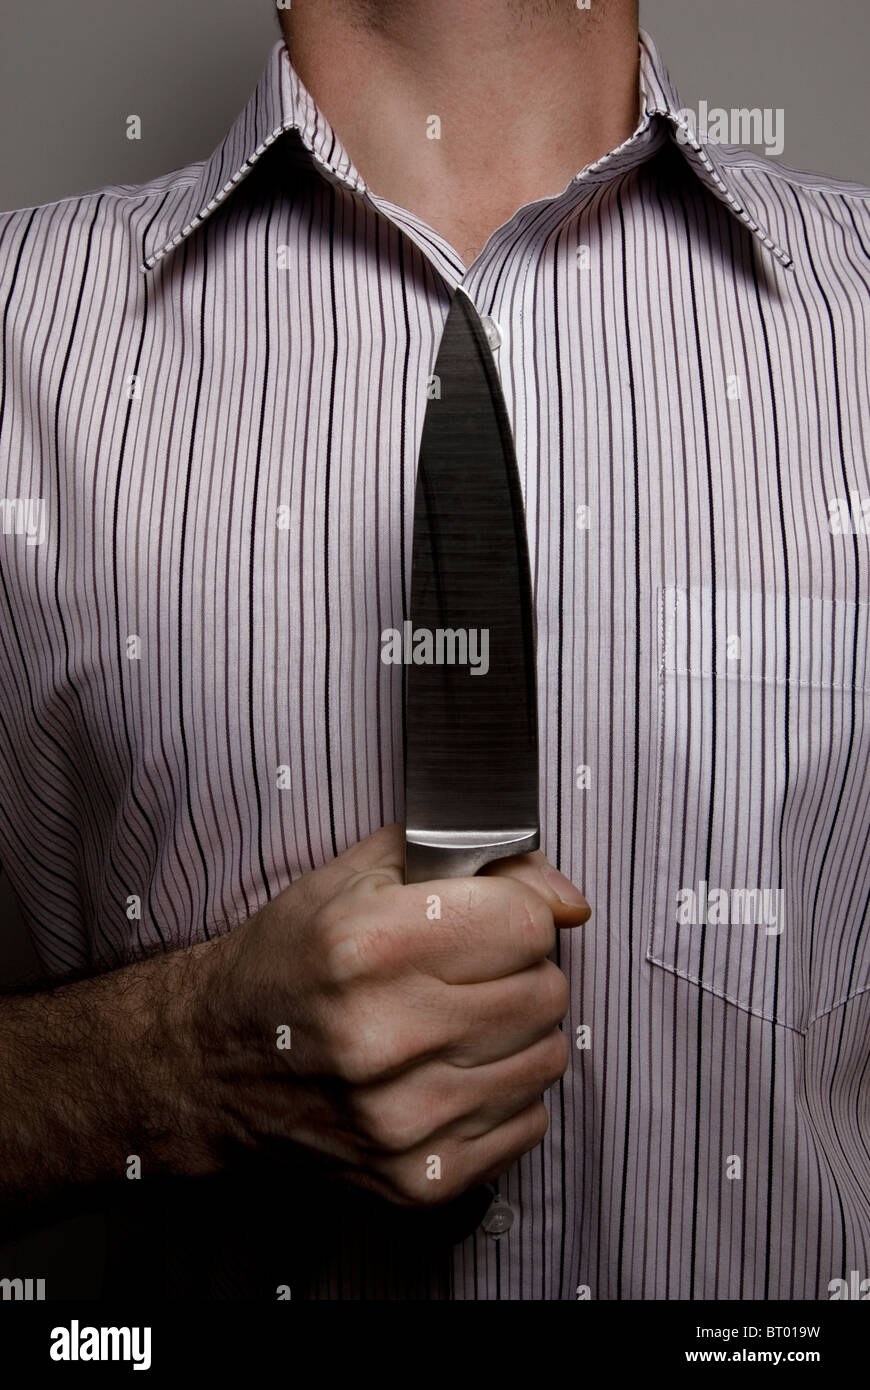 Close-up of man holding knife to chest in a threatening manner Stock Photo